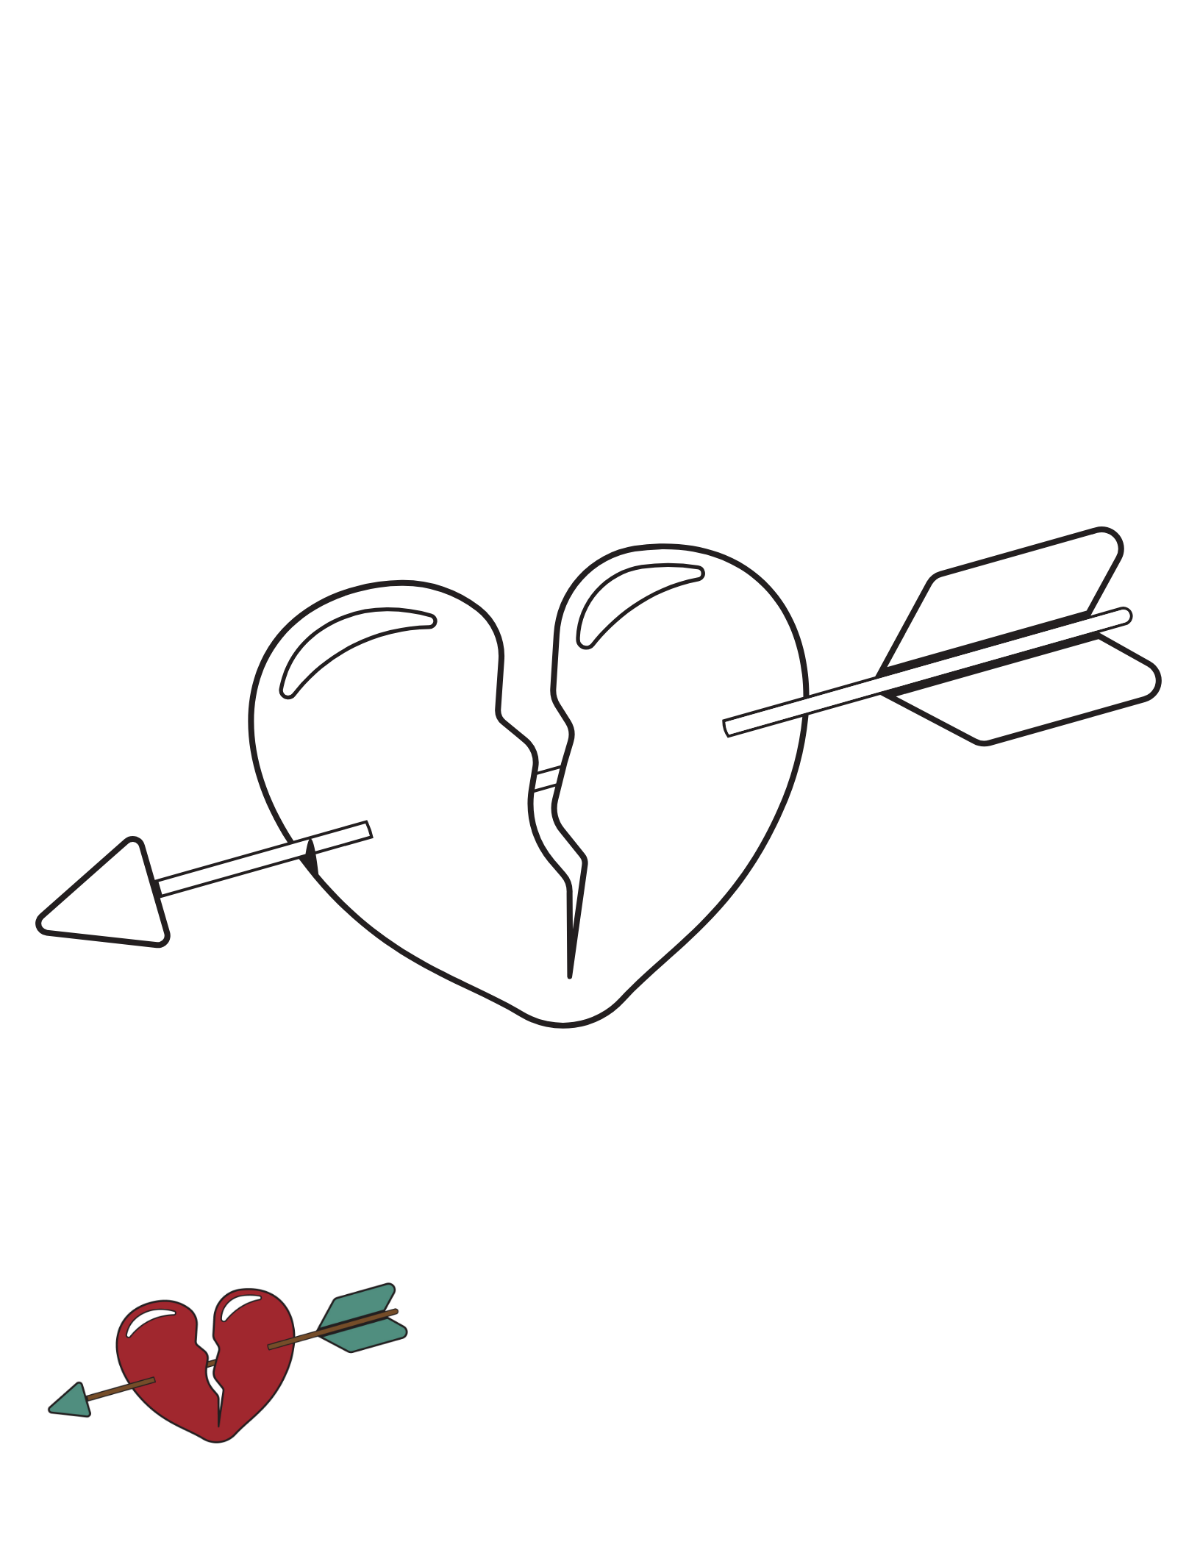 Broken Heart With Arrow Coloring Page Template